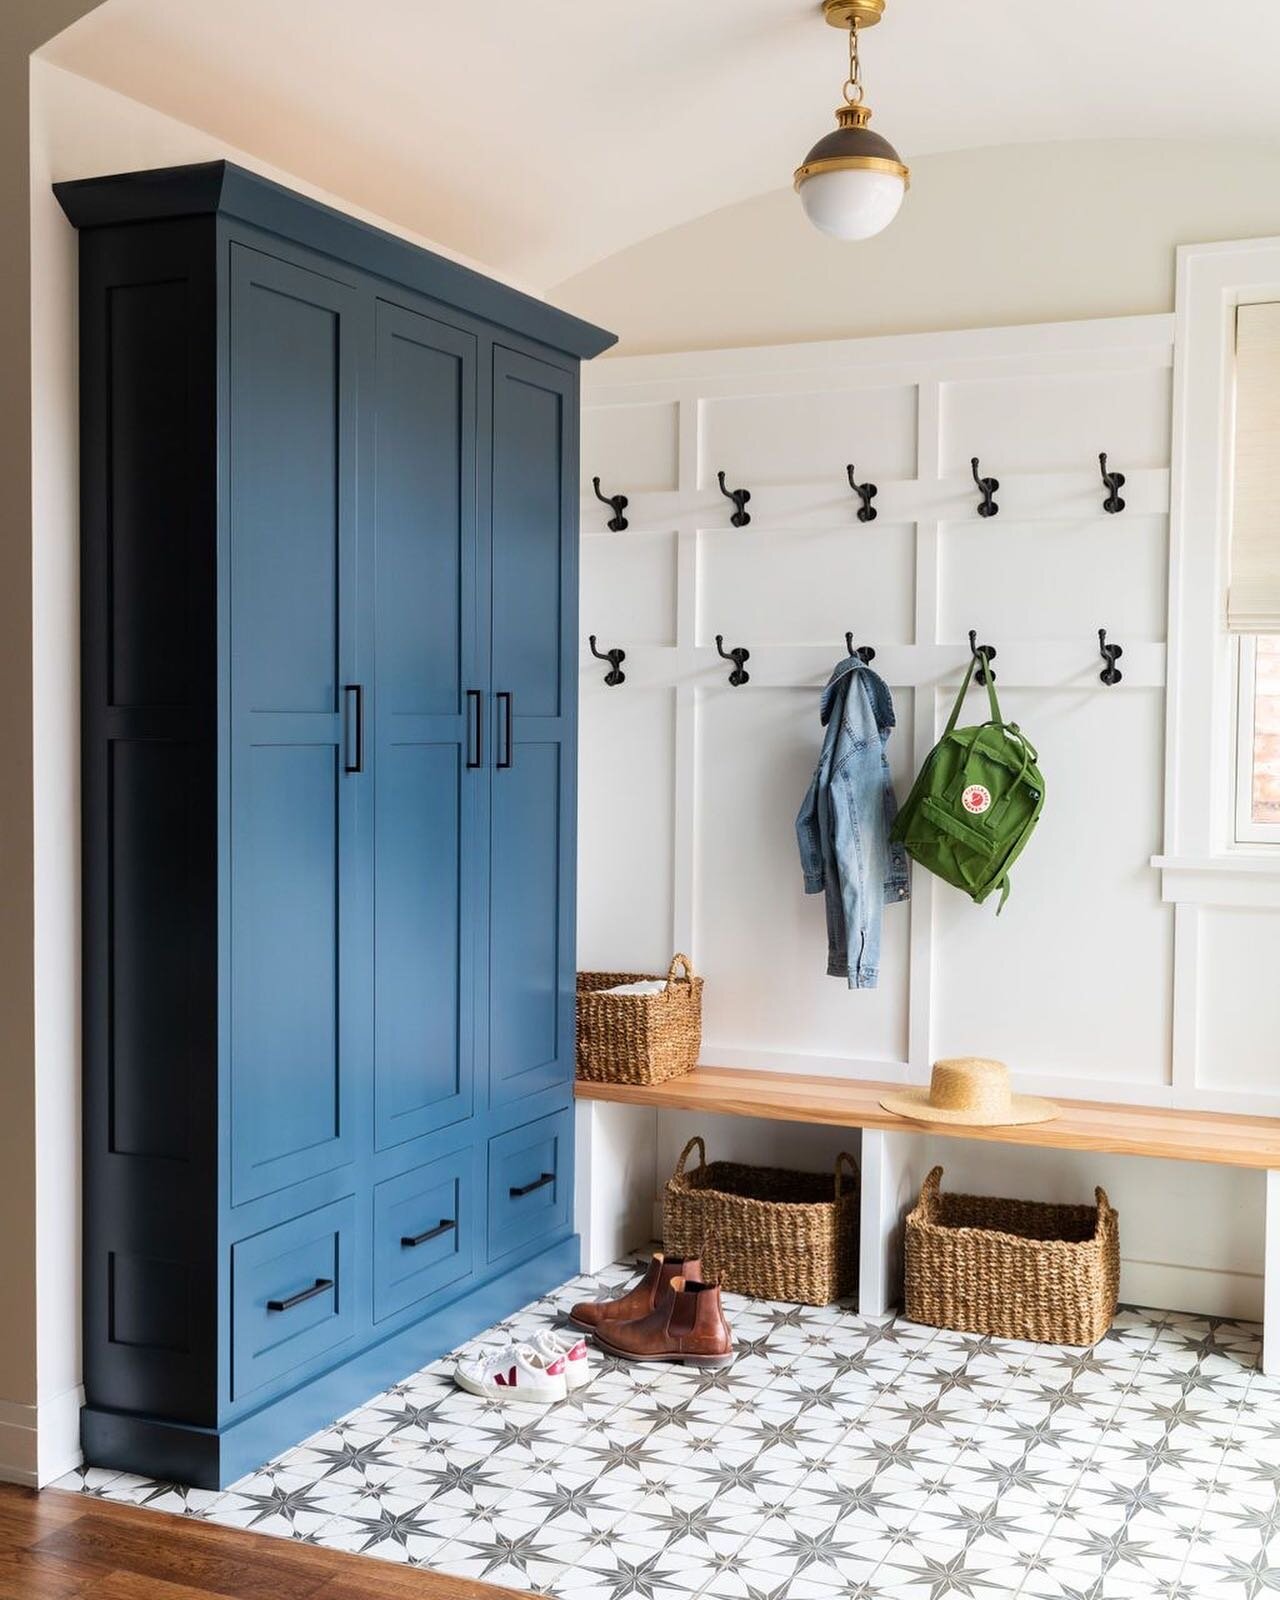 The blue cabinet in this mud room was a great idea!
.
.
.
.
.
.
.
#chicago #chicagointeriordesign #chicagogeneralcontractor #generalcontractors #interiordesign #carpentry